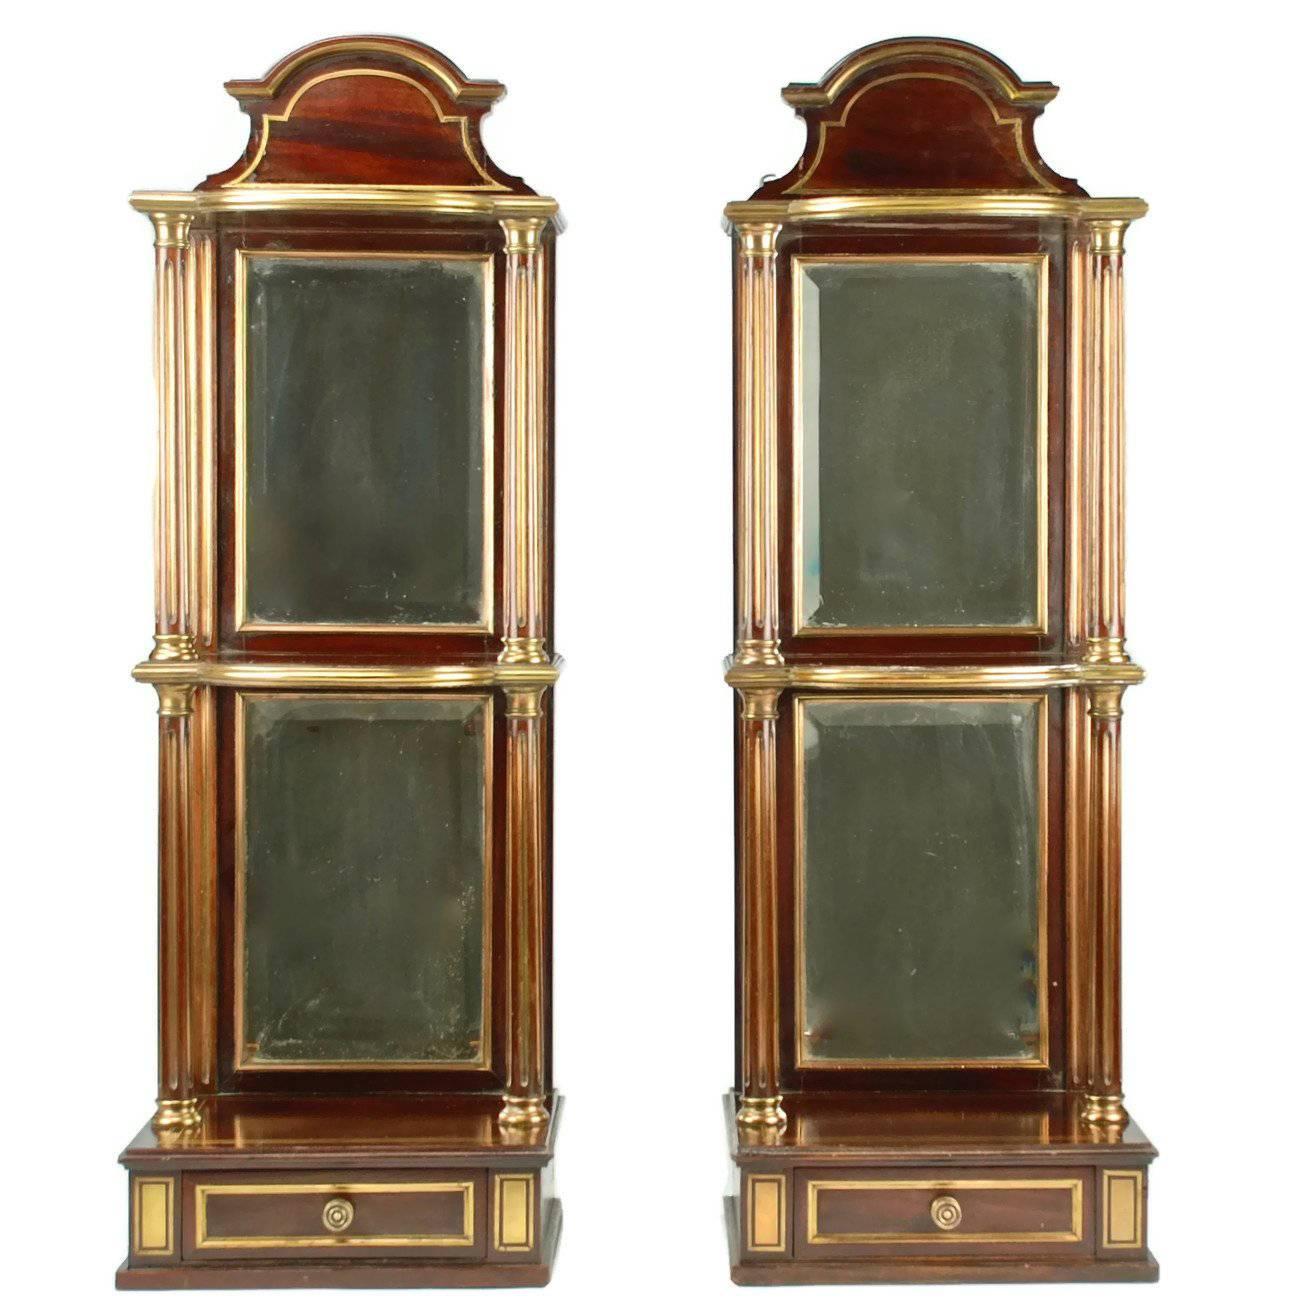 19th Century Pair of French Empire Mahogany and Brass Mirrored Wall Shelves